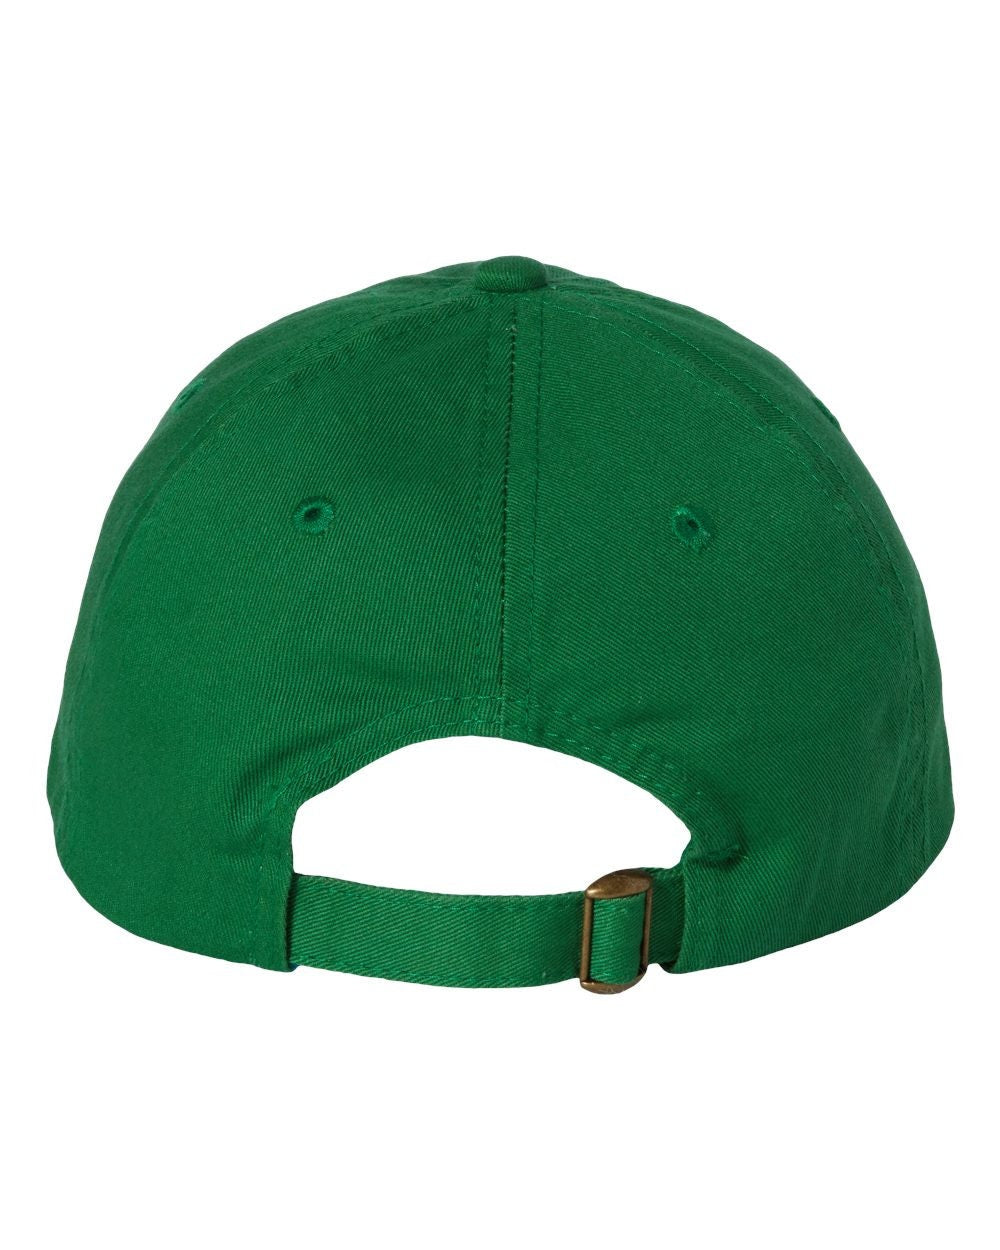 Youth/Small Sized Puffed Shamrock St. Patrick's Day Embroidered Dad Hat | Green Baseball Cap | St. Paddy's Day